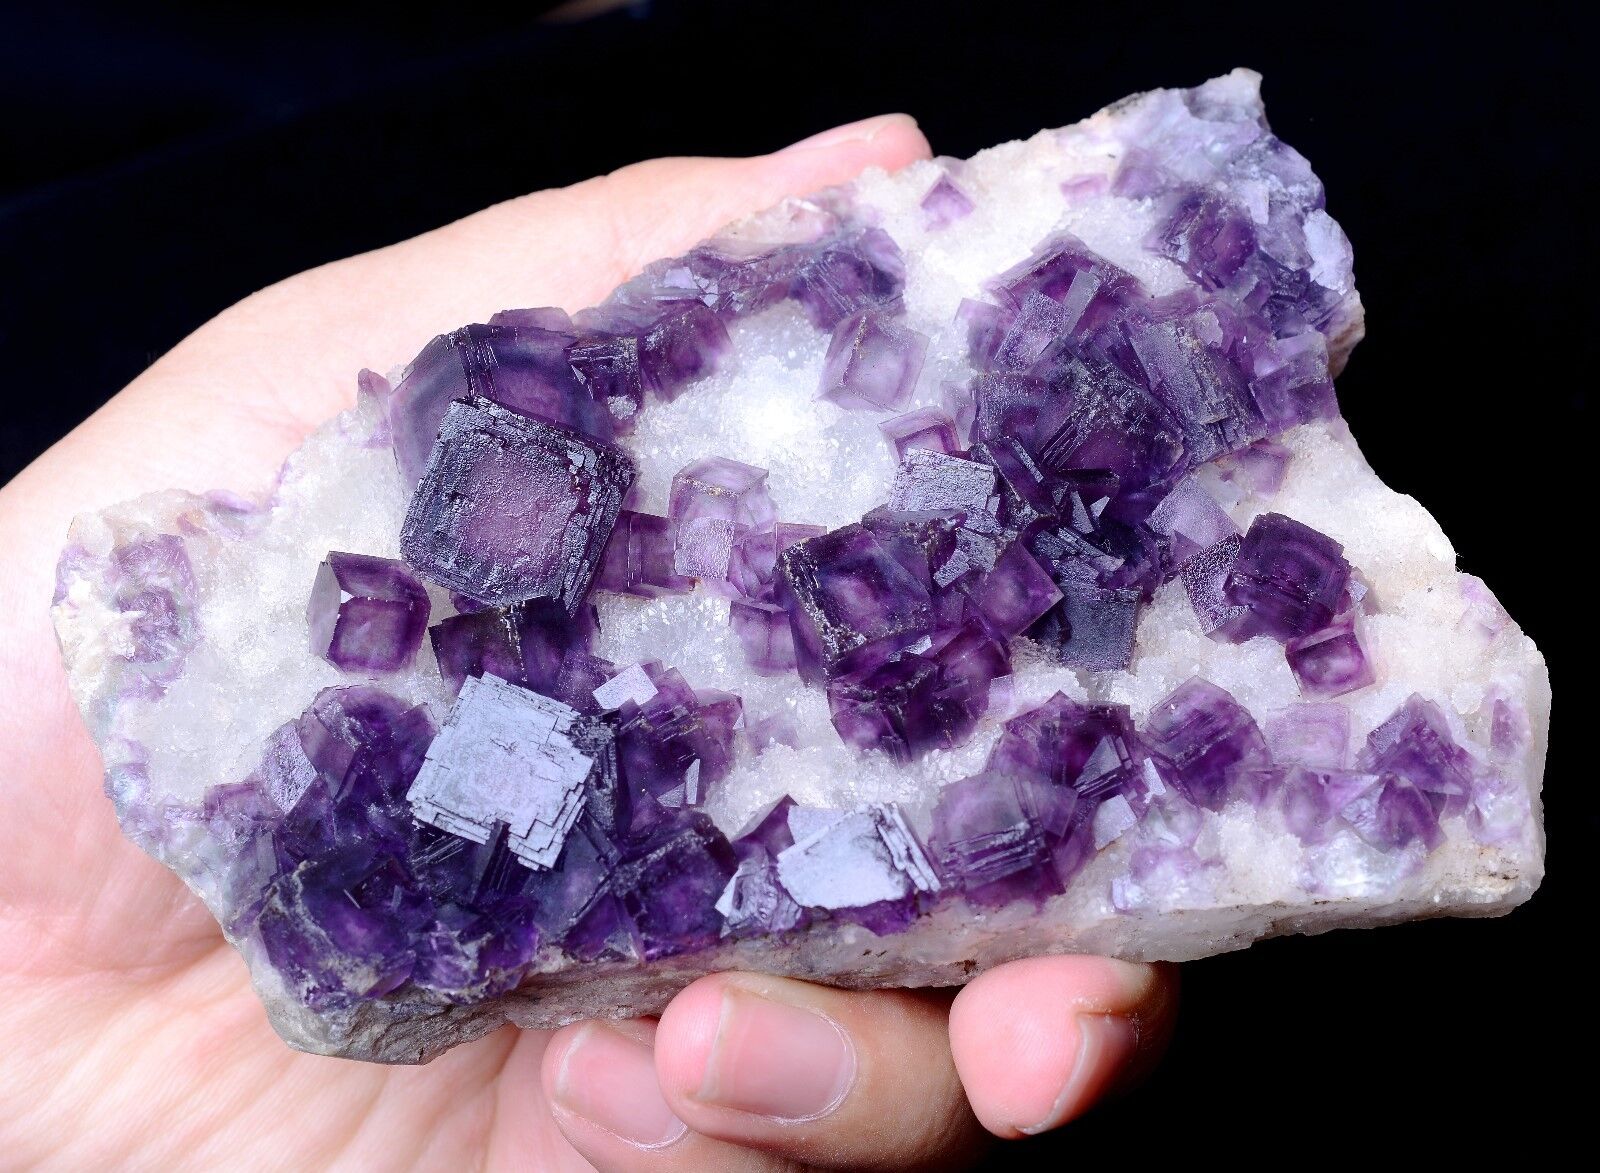 NEWLY DISCOVERED RARE PURPLE FLUORITE CRYSTAL CLUSTER MINERAL SAMPLES 398g